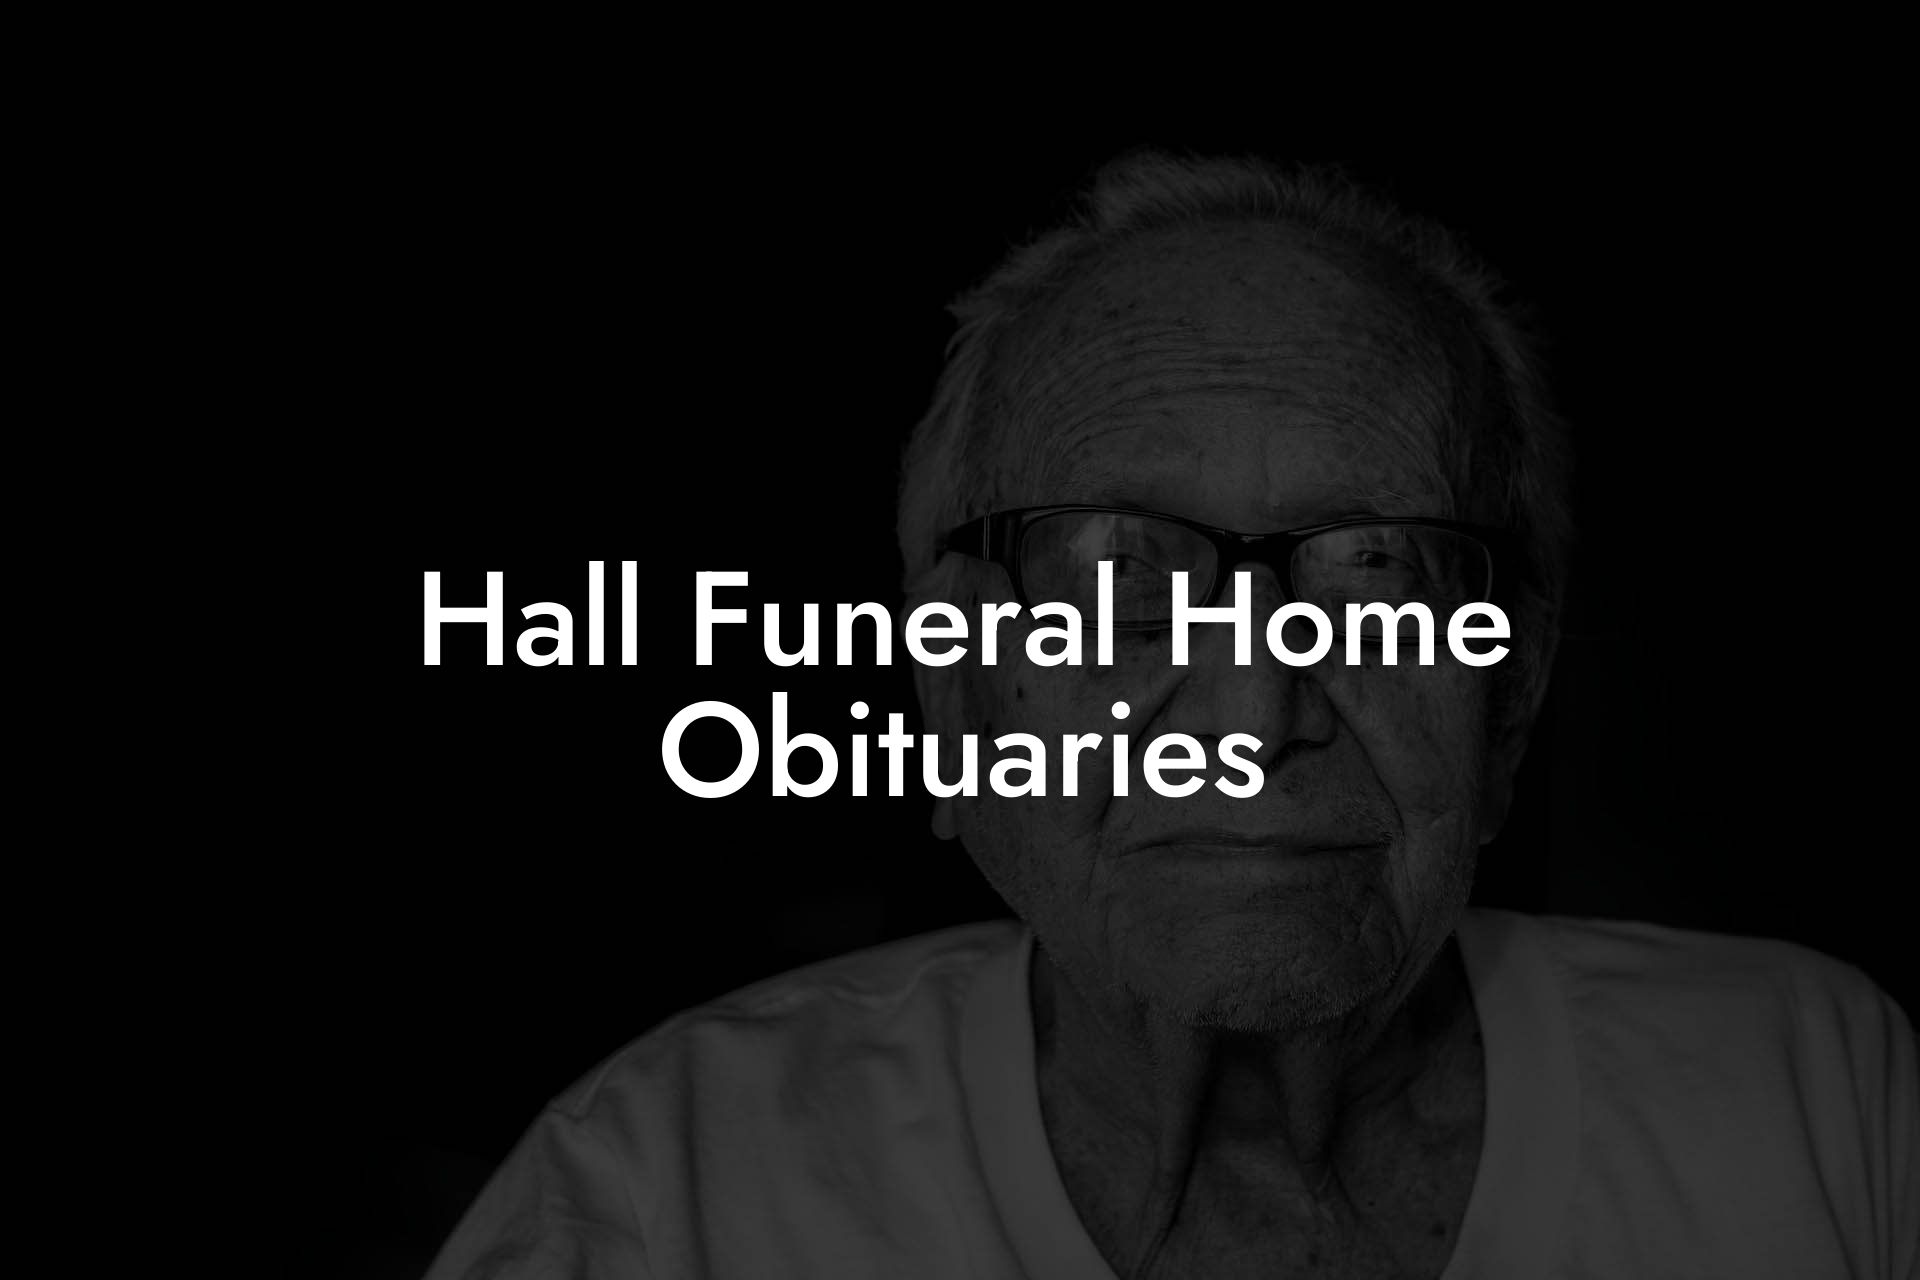 Hall Funeral Home Obituaries